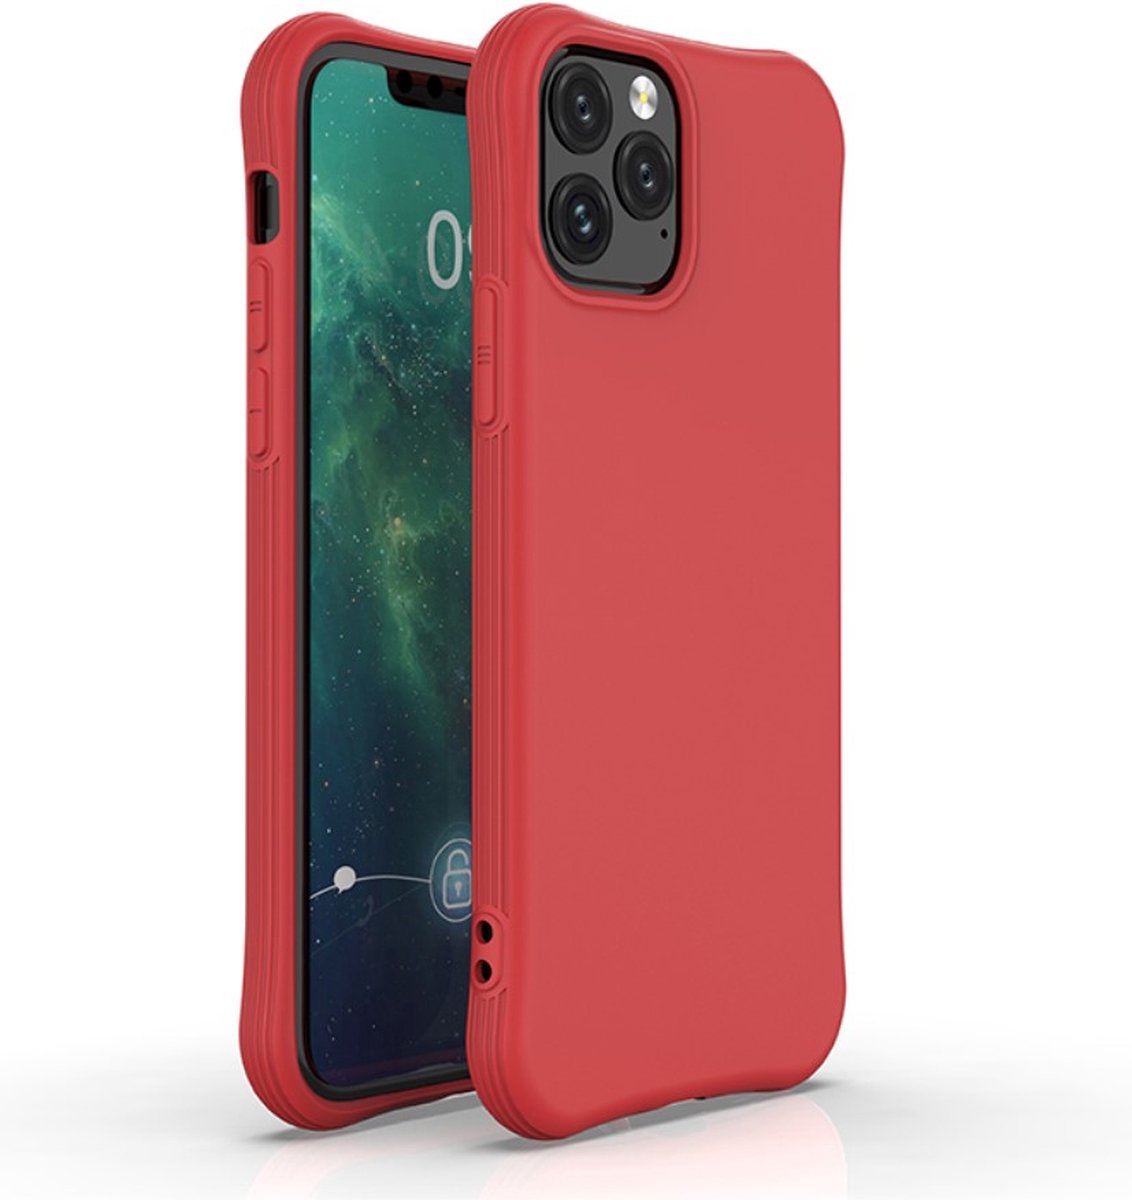 Peachy Soft case TPU hoesje voor iPhone 11 Pro - rood